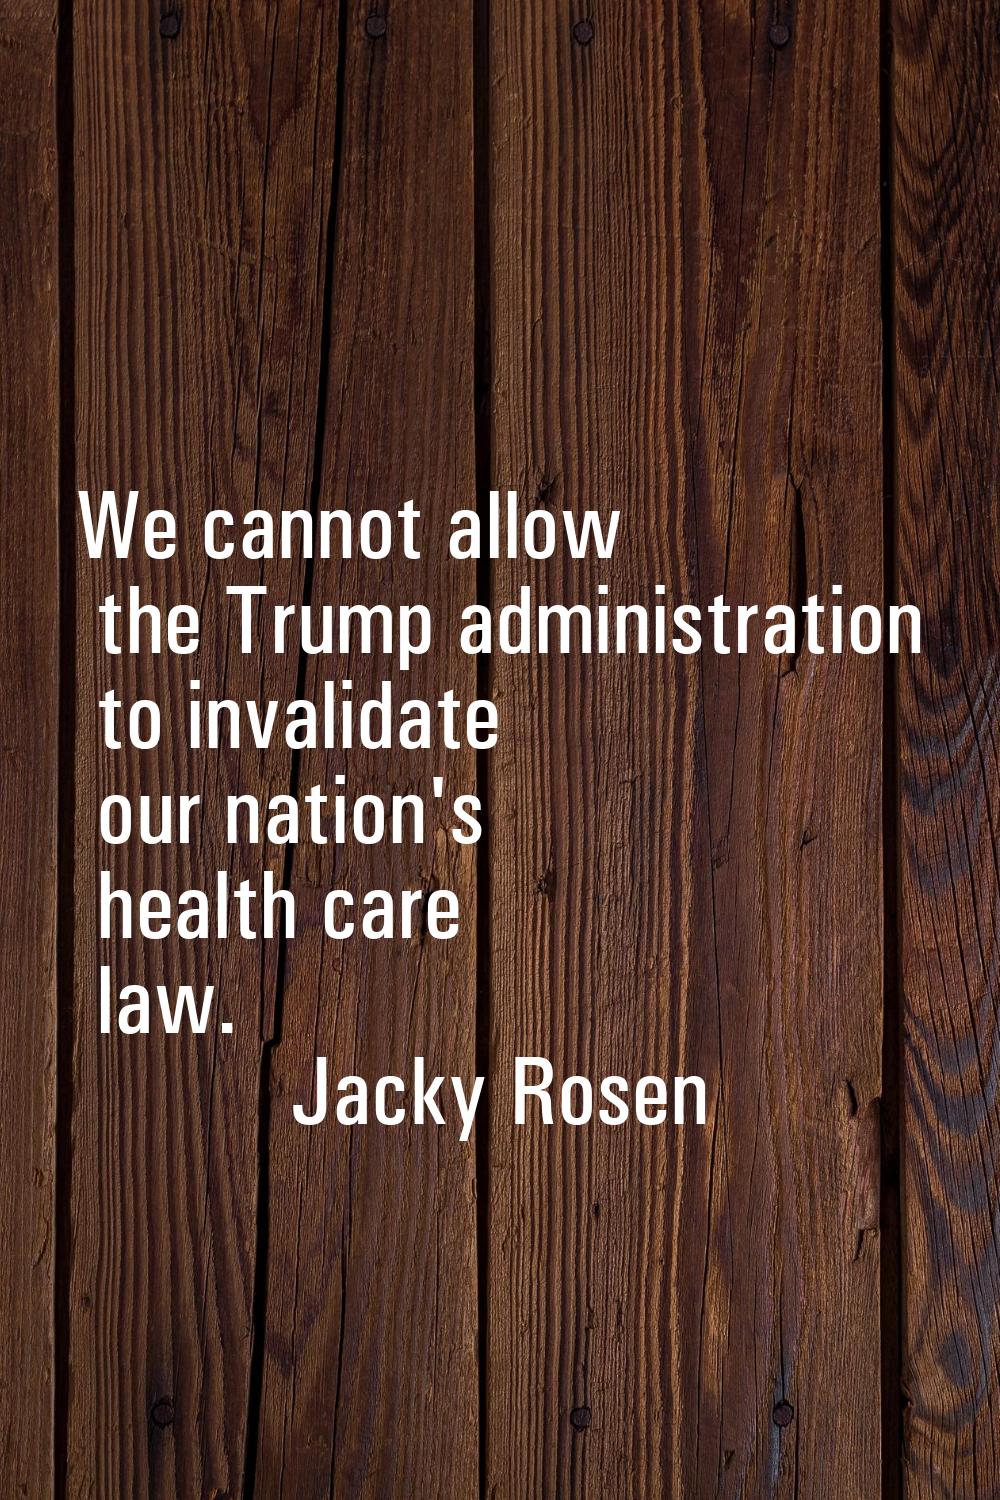 We cannot allow the Trump administration to invalidate our nation's health care law.